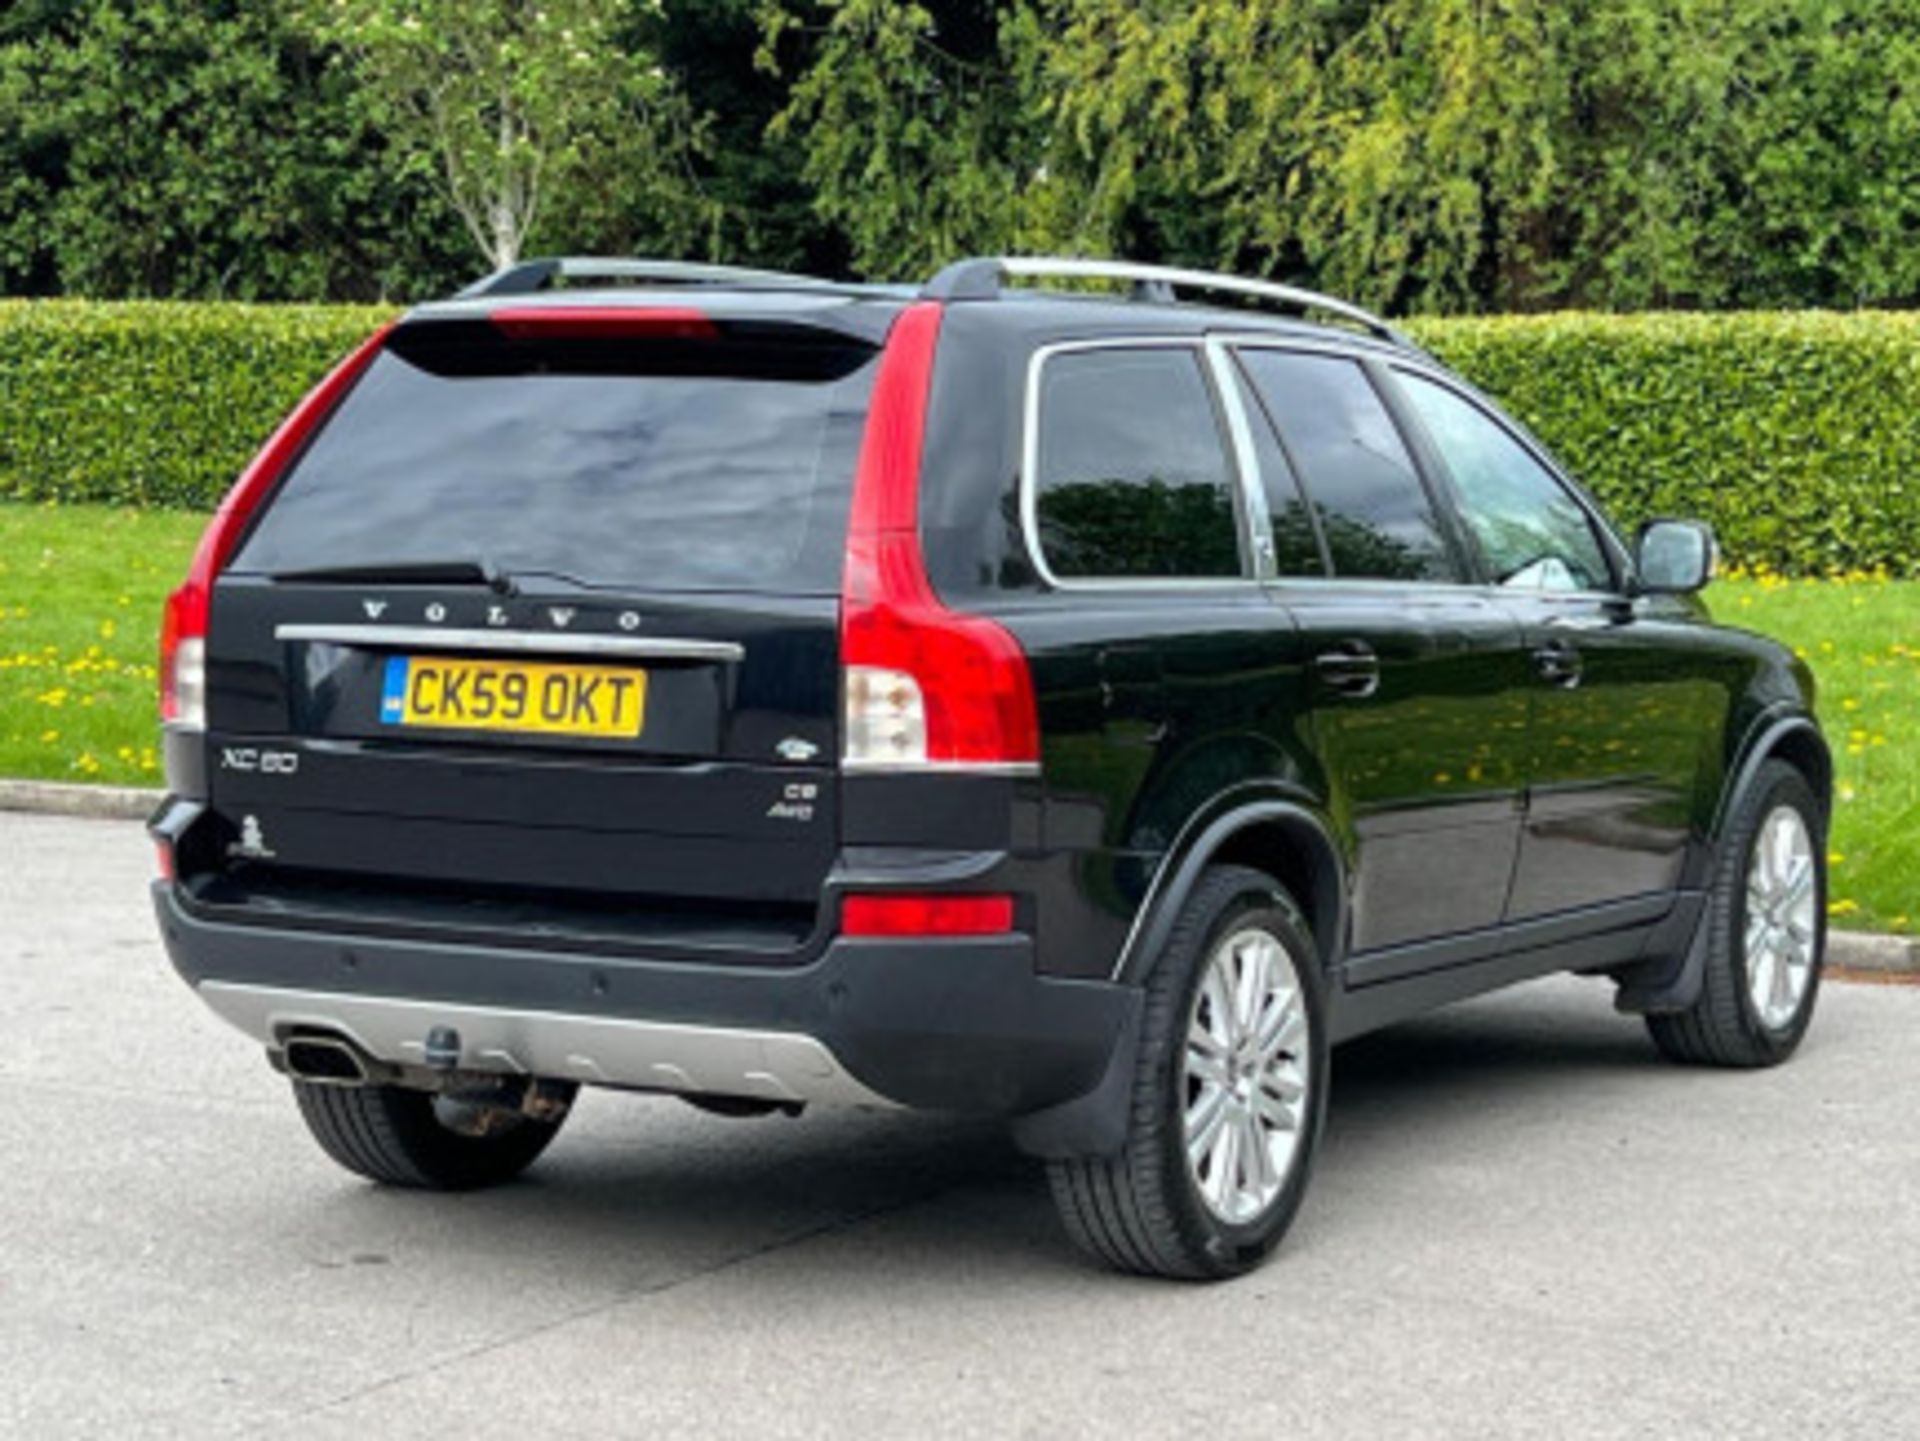 VOLVO XC90 2.4 D5 EXECUTIVE GEARTRONIC AWD, 5DR >>--NO VAT ON HAMMER--<< - Image 64 of 136